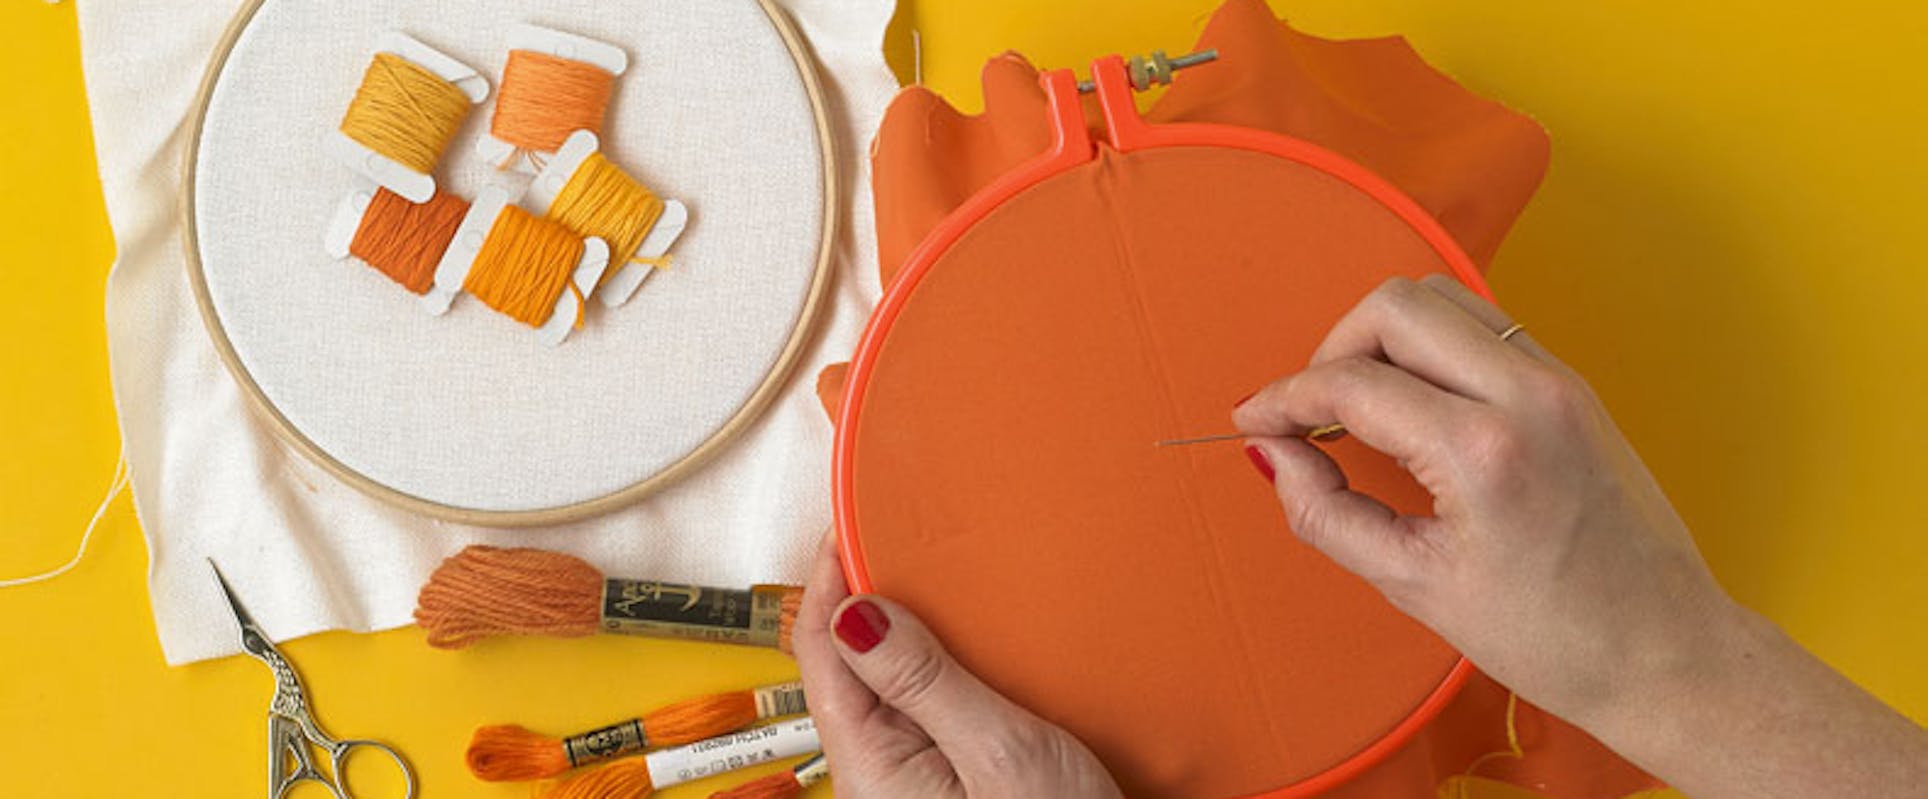 27 Best Embroidery Tools ideas  embroidery tools, embroidery, tools